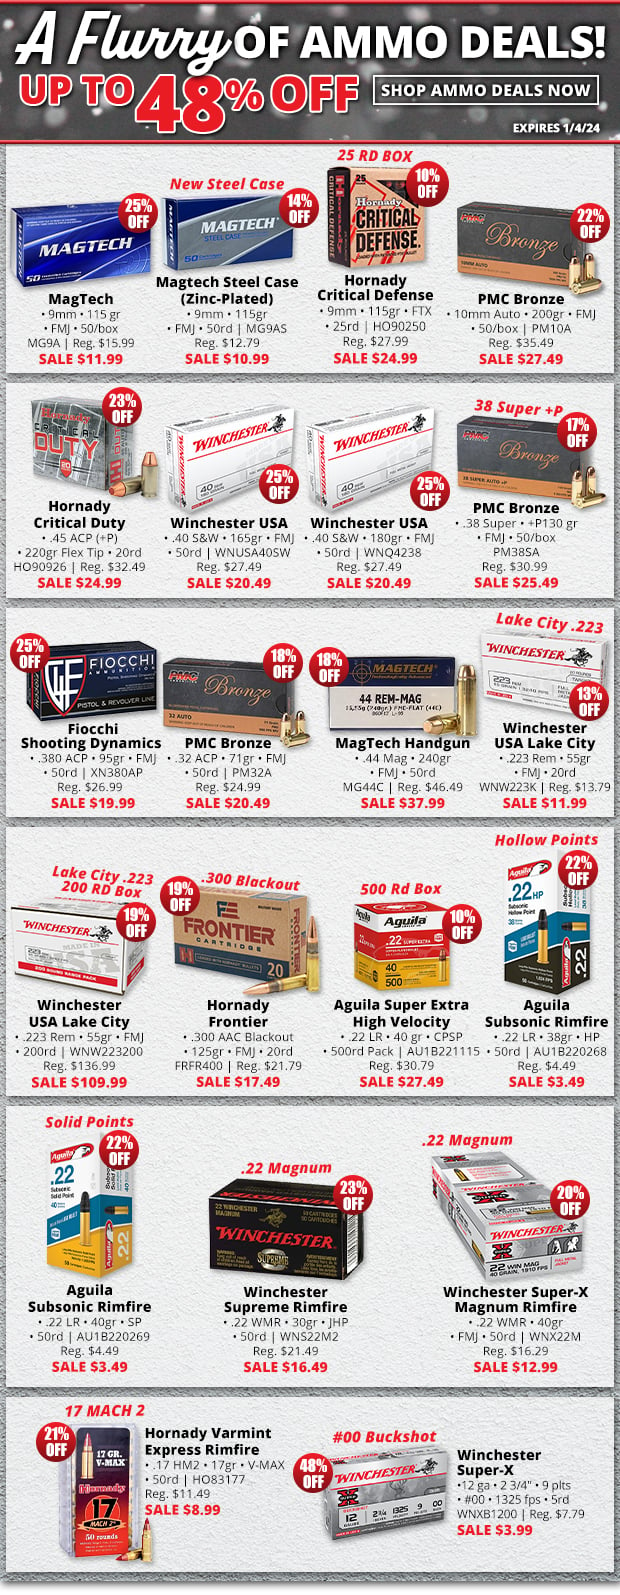 Up to 48% Off With Our Flurry of Ammo Deals!